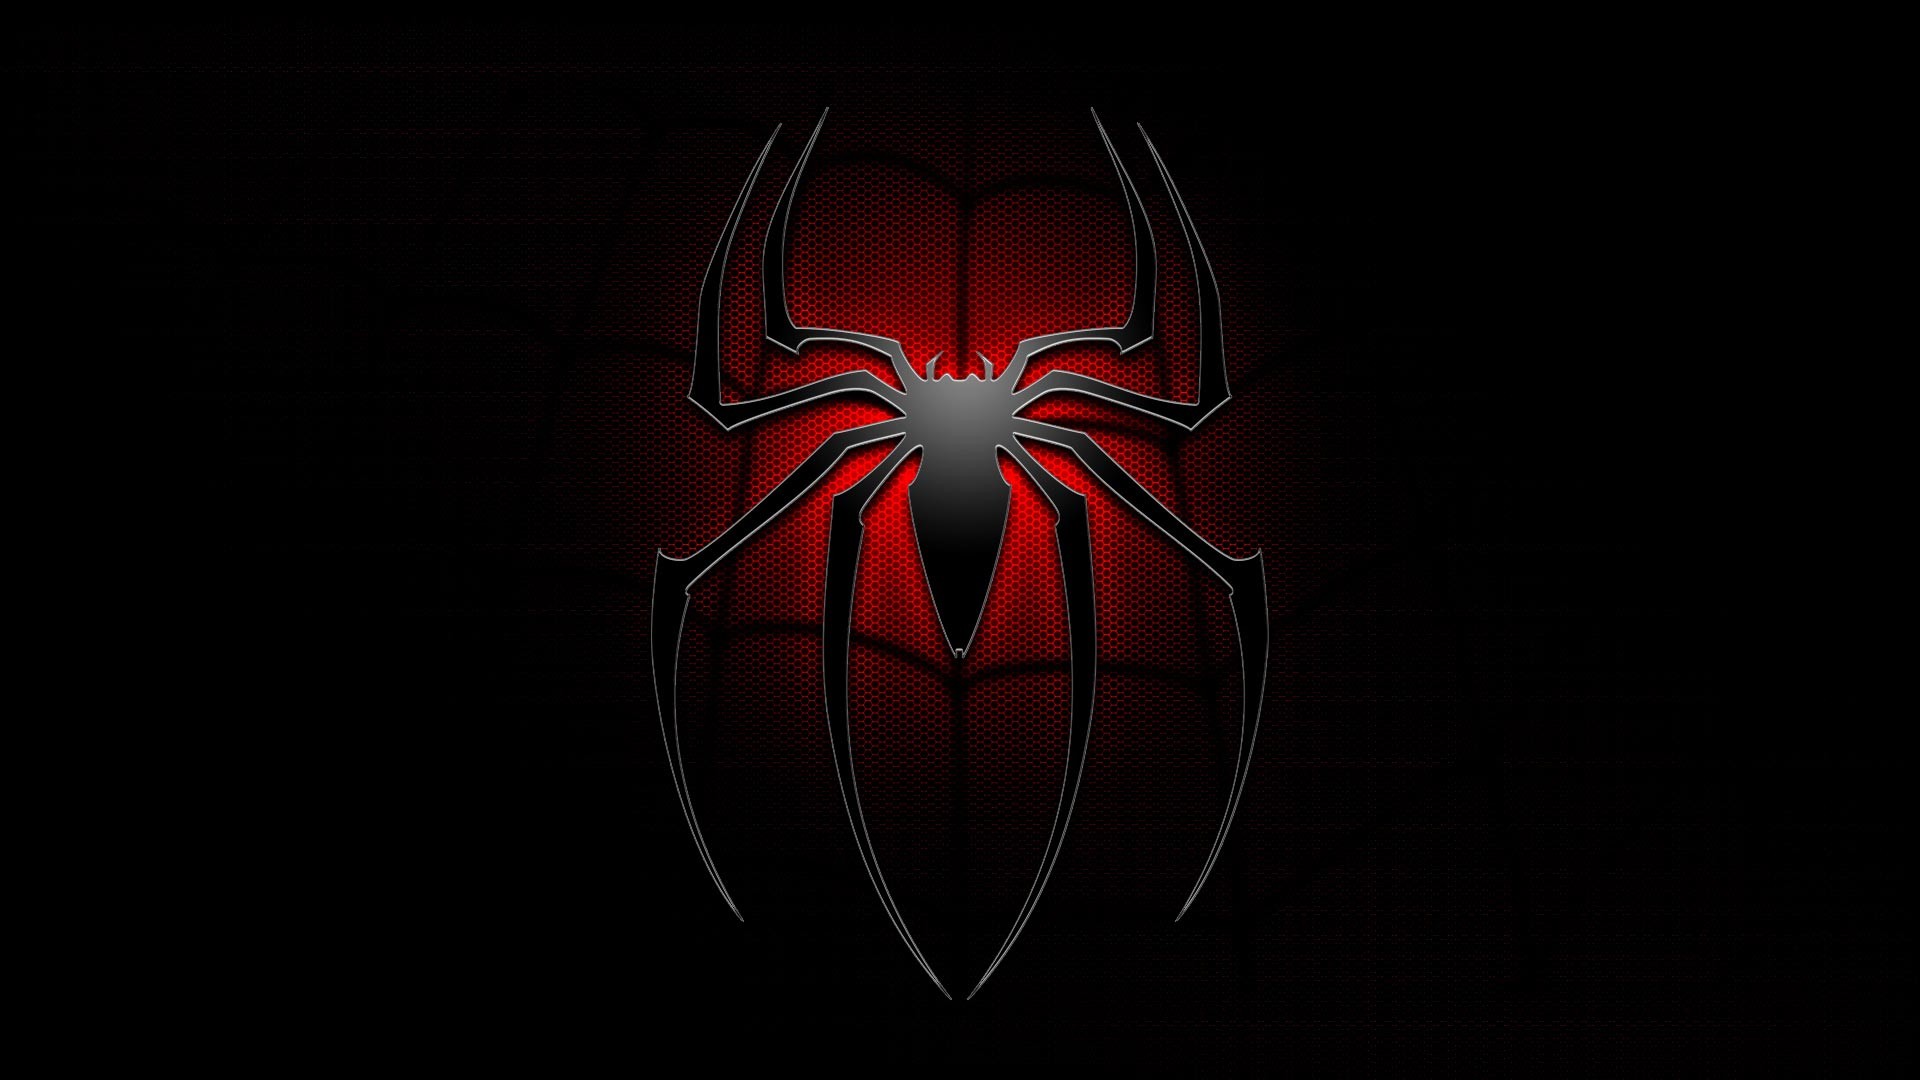 1920x1080 The Amazing Spider Man 2 HD Wallpapers.  amazing_spider_man_2_movie_wallpapers_desktop_backgrounds_the_amazing_spiderman_2014_hd_wallpapers-(3)